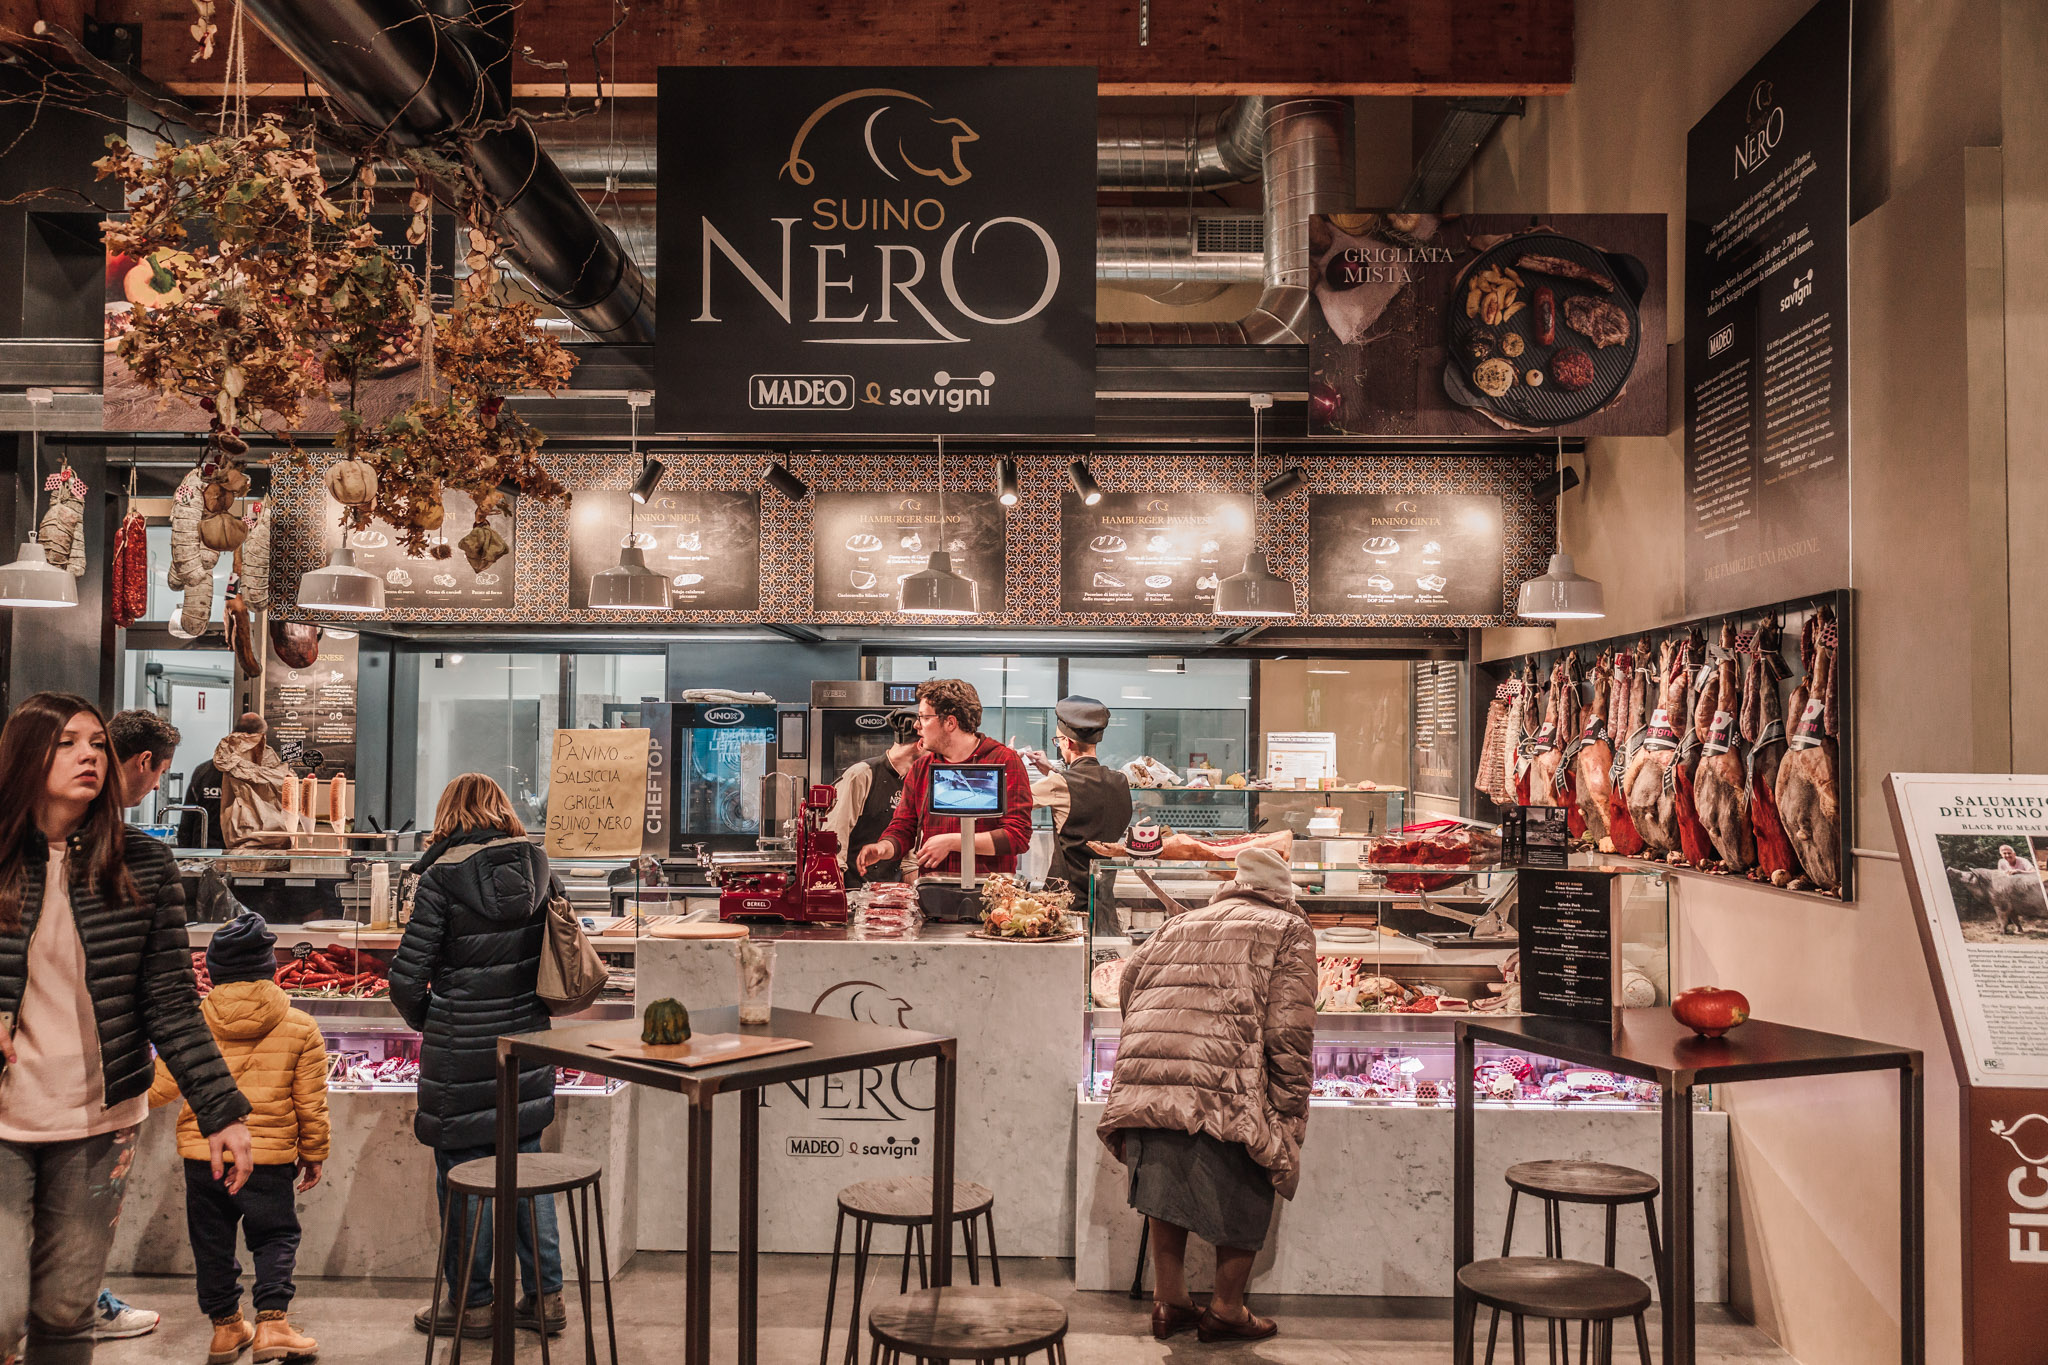 The Quick Guide to Visiting FICO Eataly World in Bologna, Italy // #readysetjetset #ficoeatalyworld #bologna #italy #food #italianfood www.readysetjetset.net